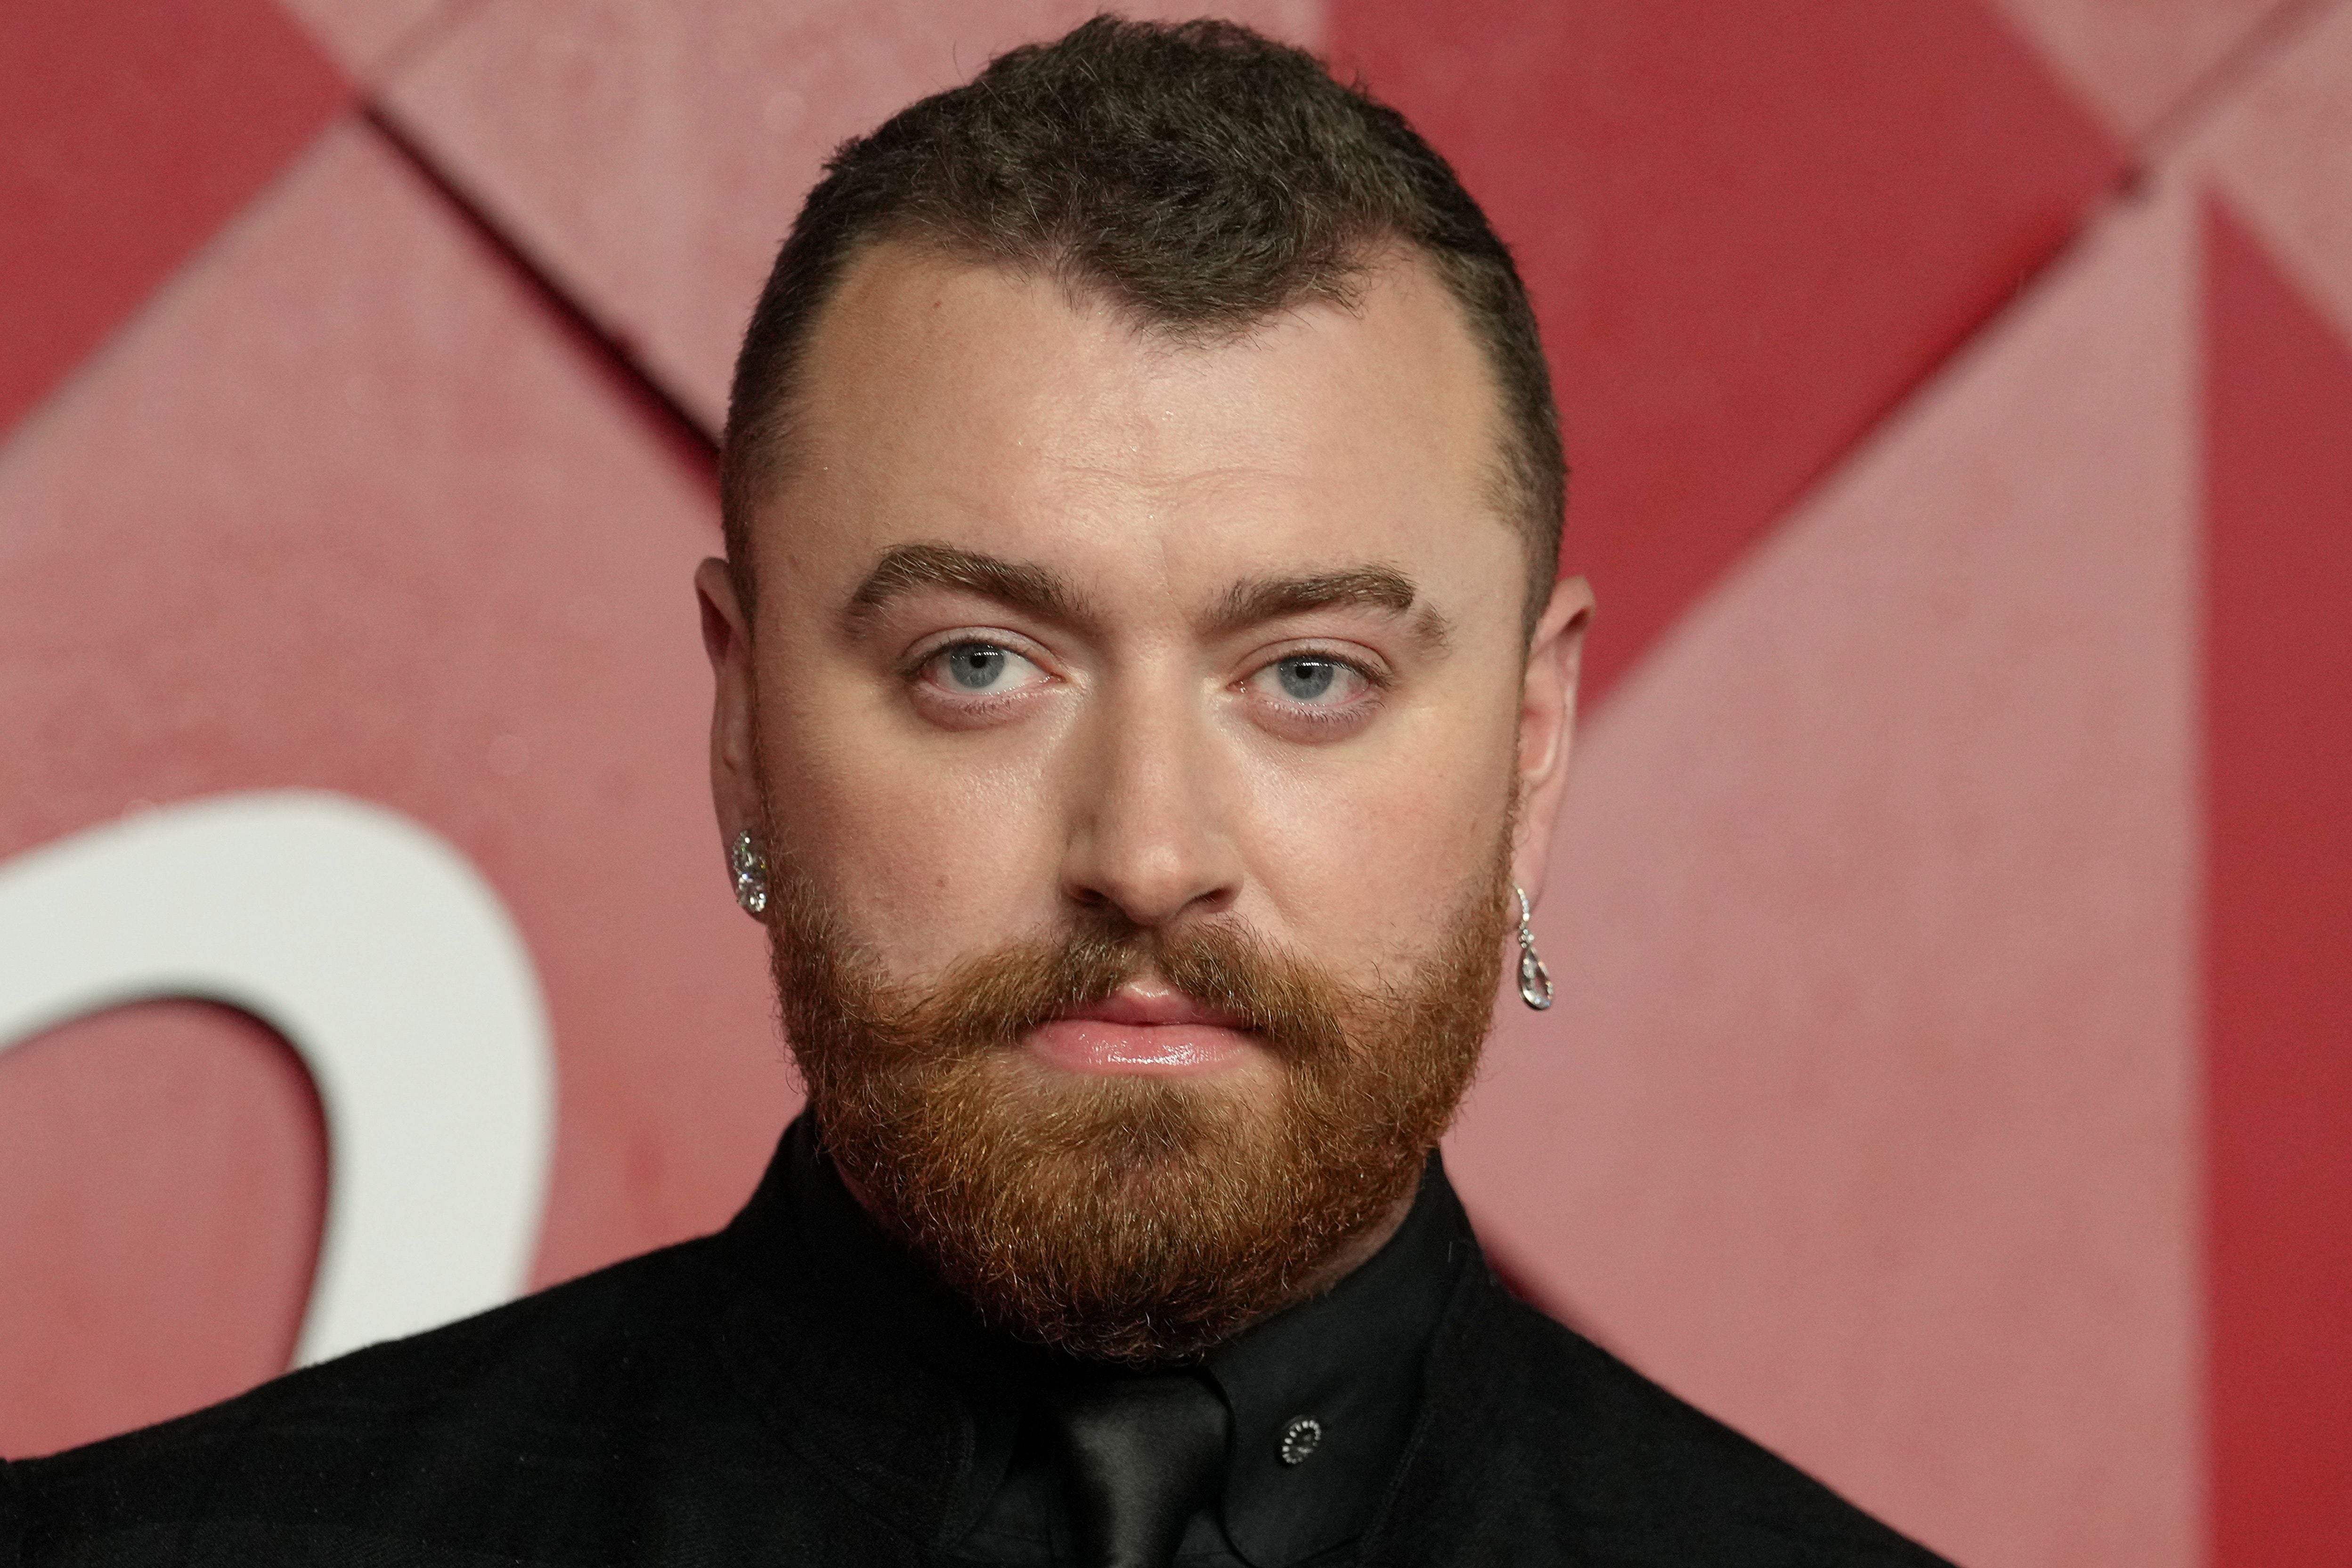 Sam Smith poses on the red carpet of the annual Fashion Awards at the Royal Albert Hall in London, Britain, December 4, 2023. REUTERS/Maja Smiejkowska